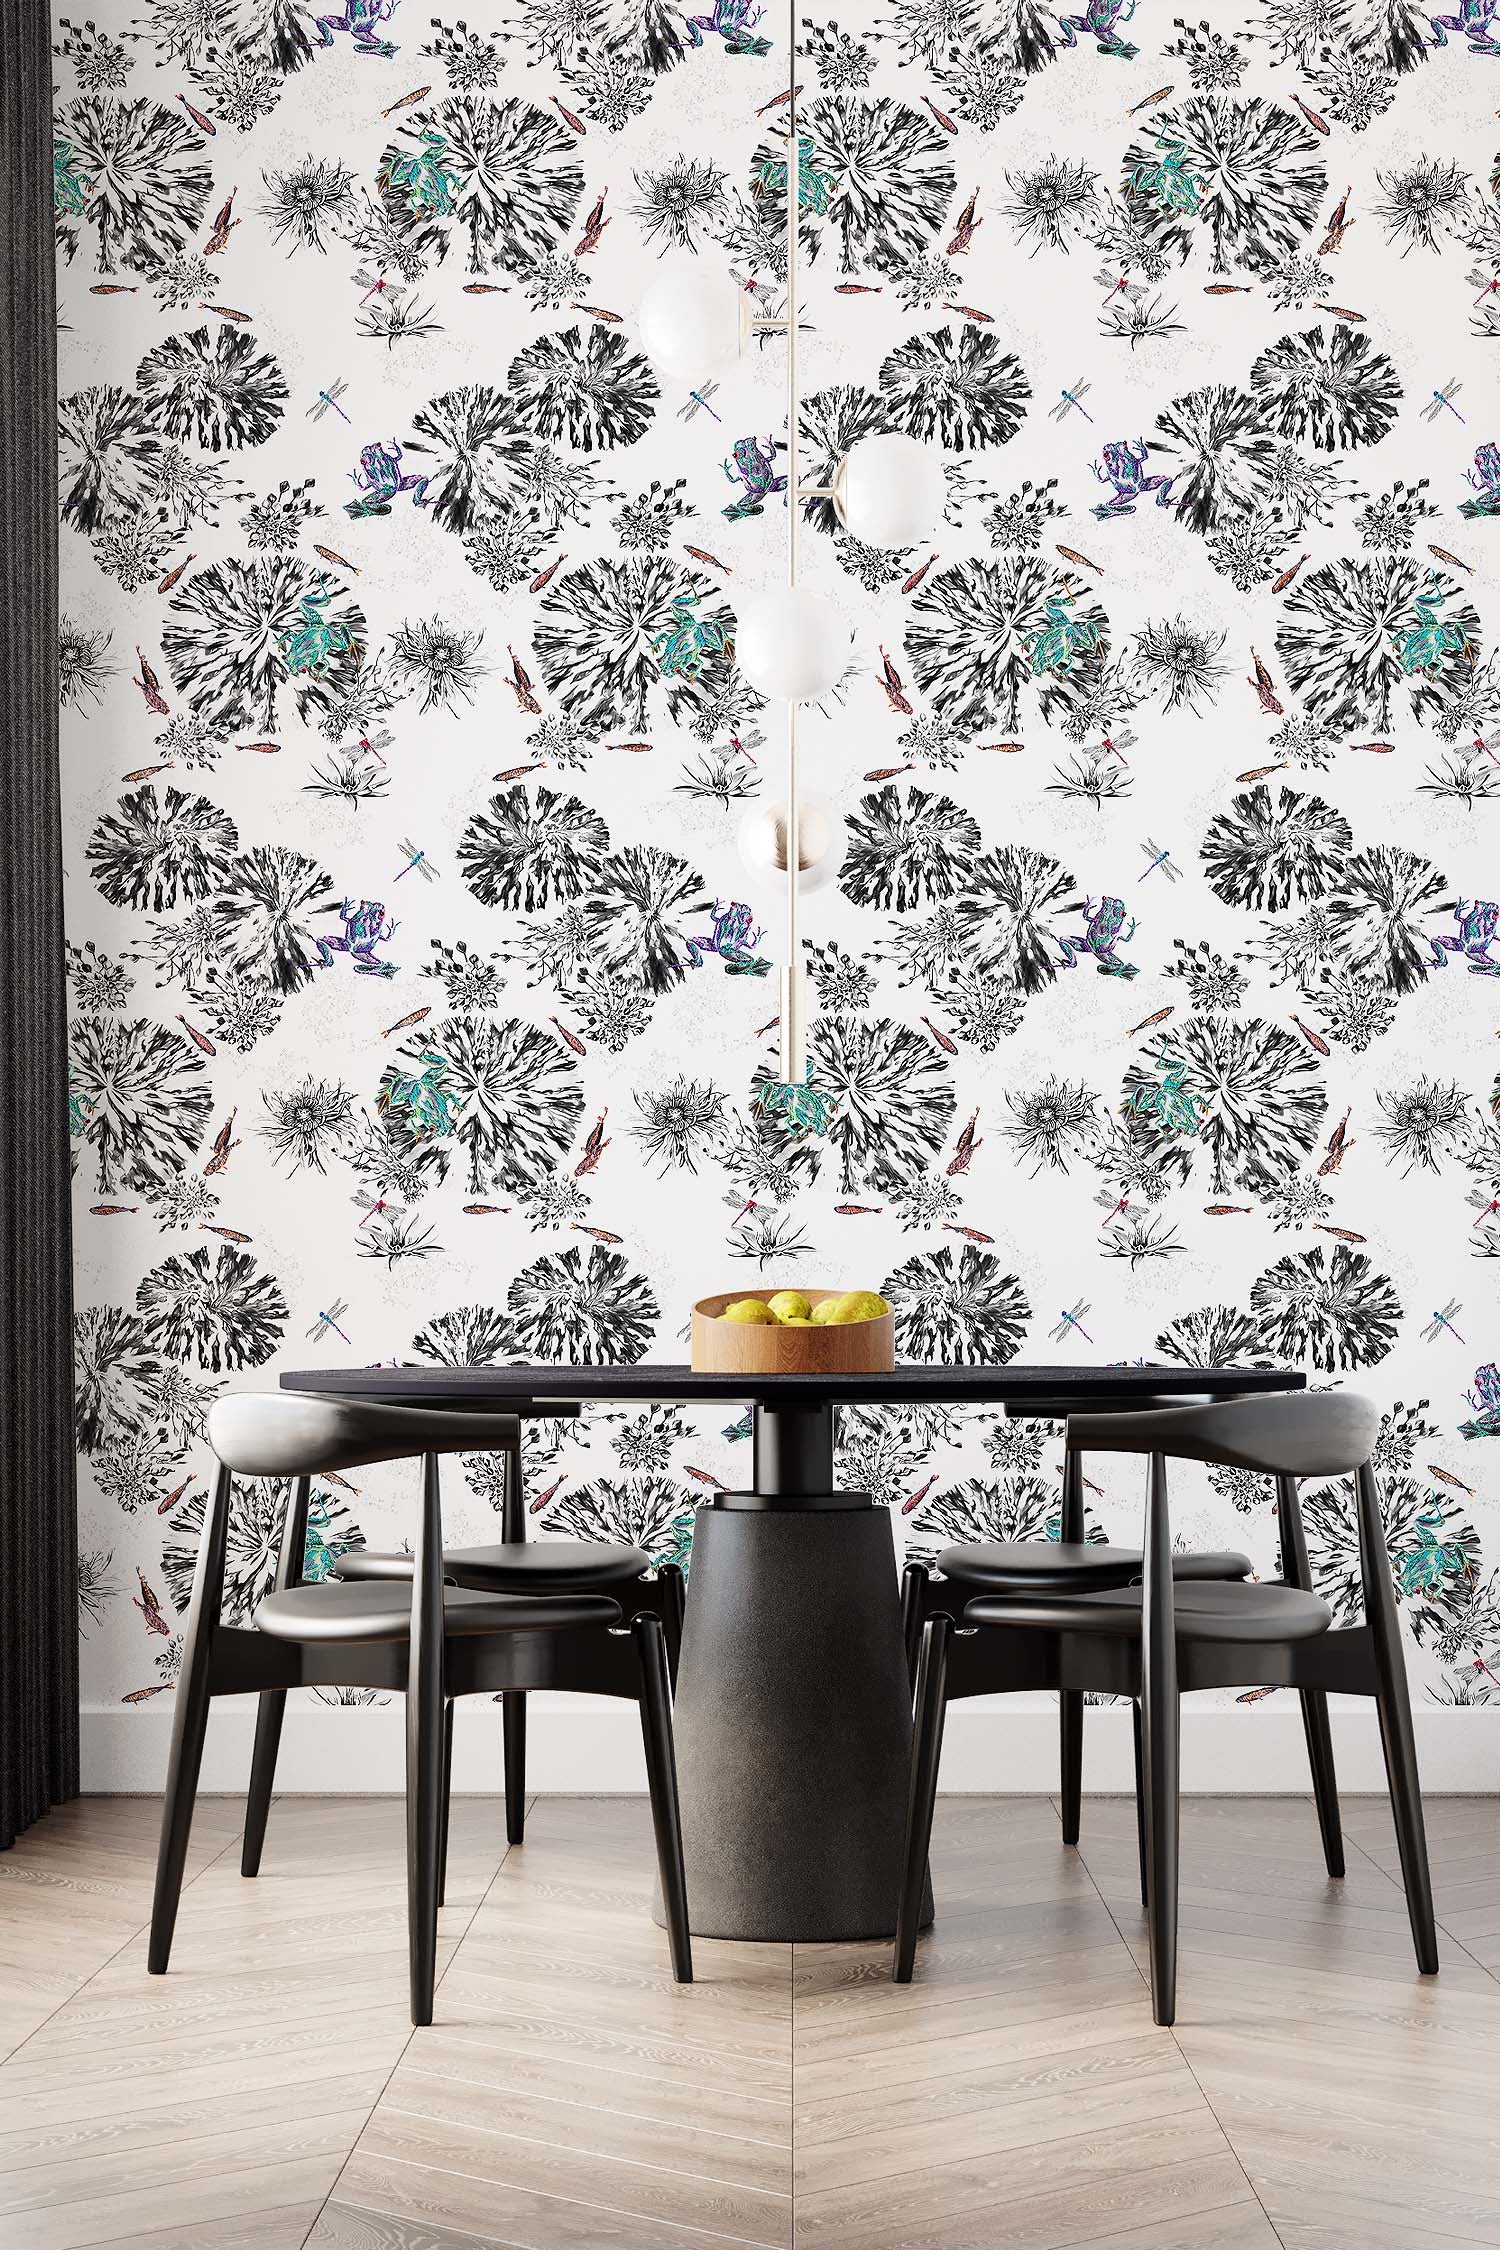 Frogs wallpaper on dining room wall